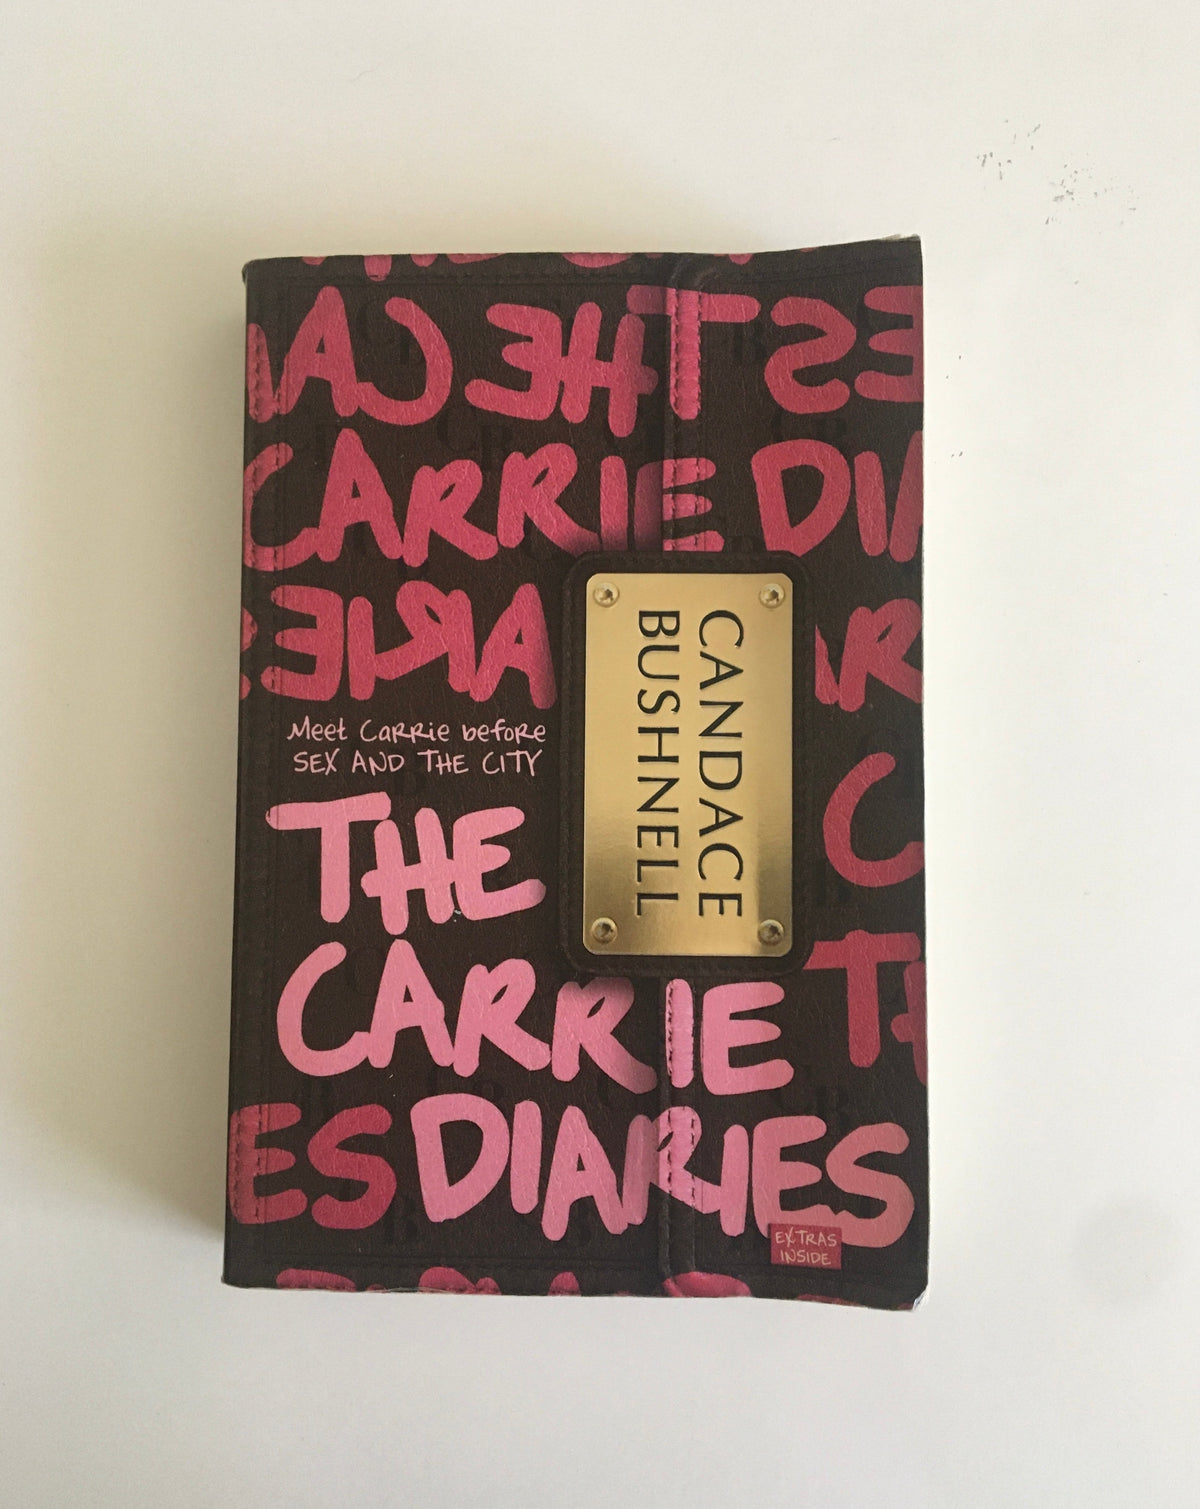 The Carrie Diaries by Candice Bushnell